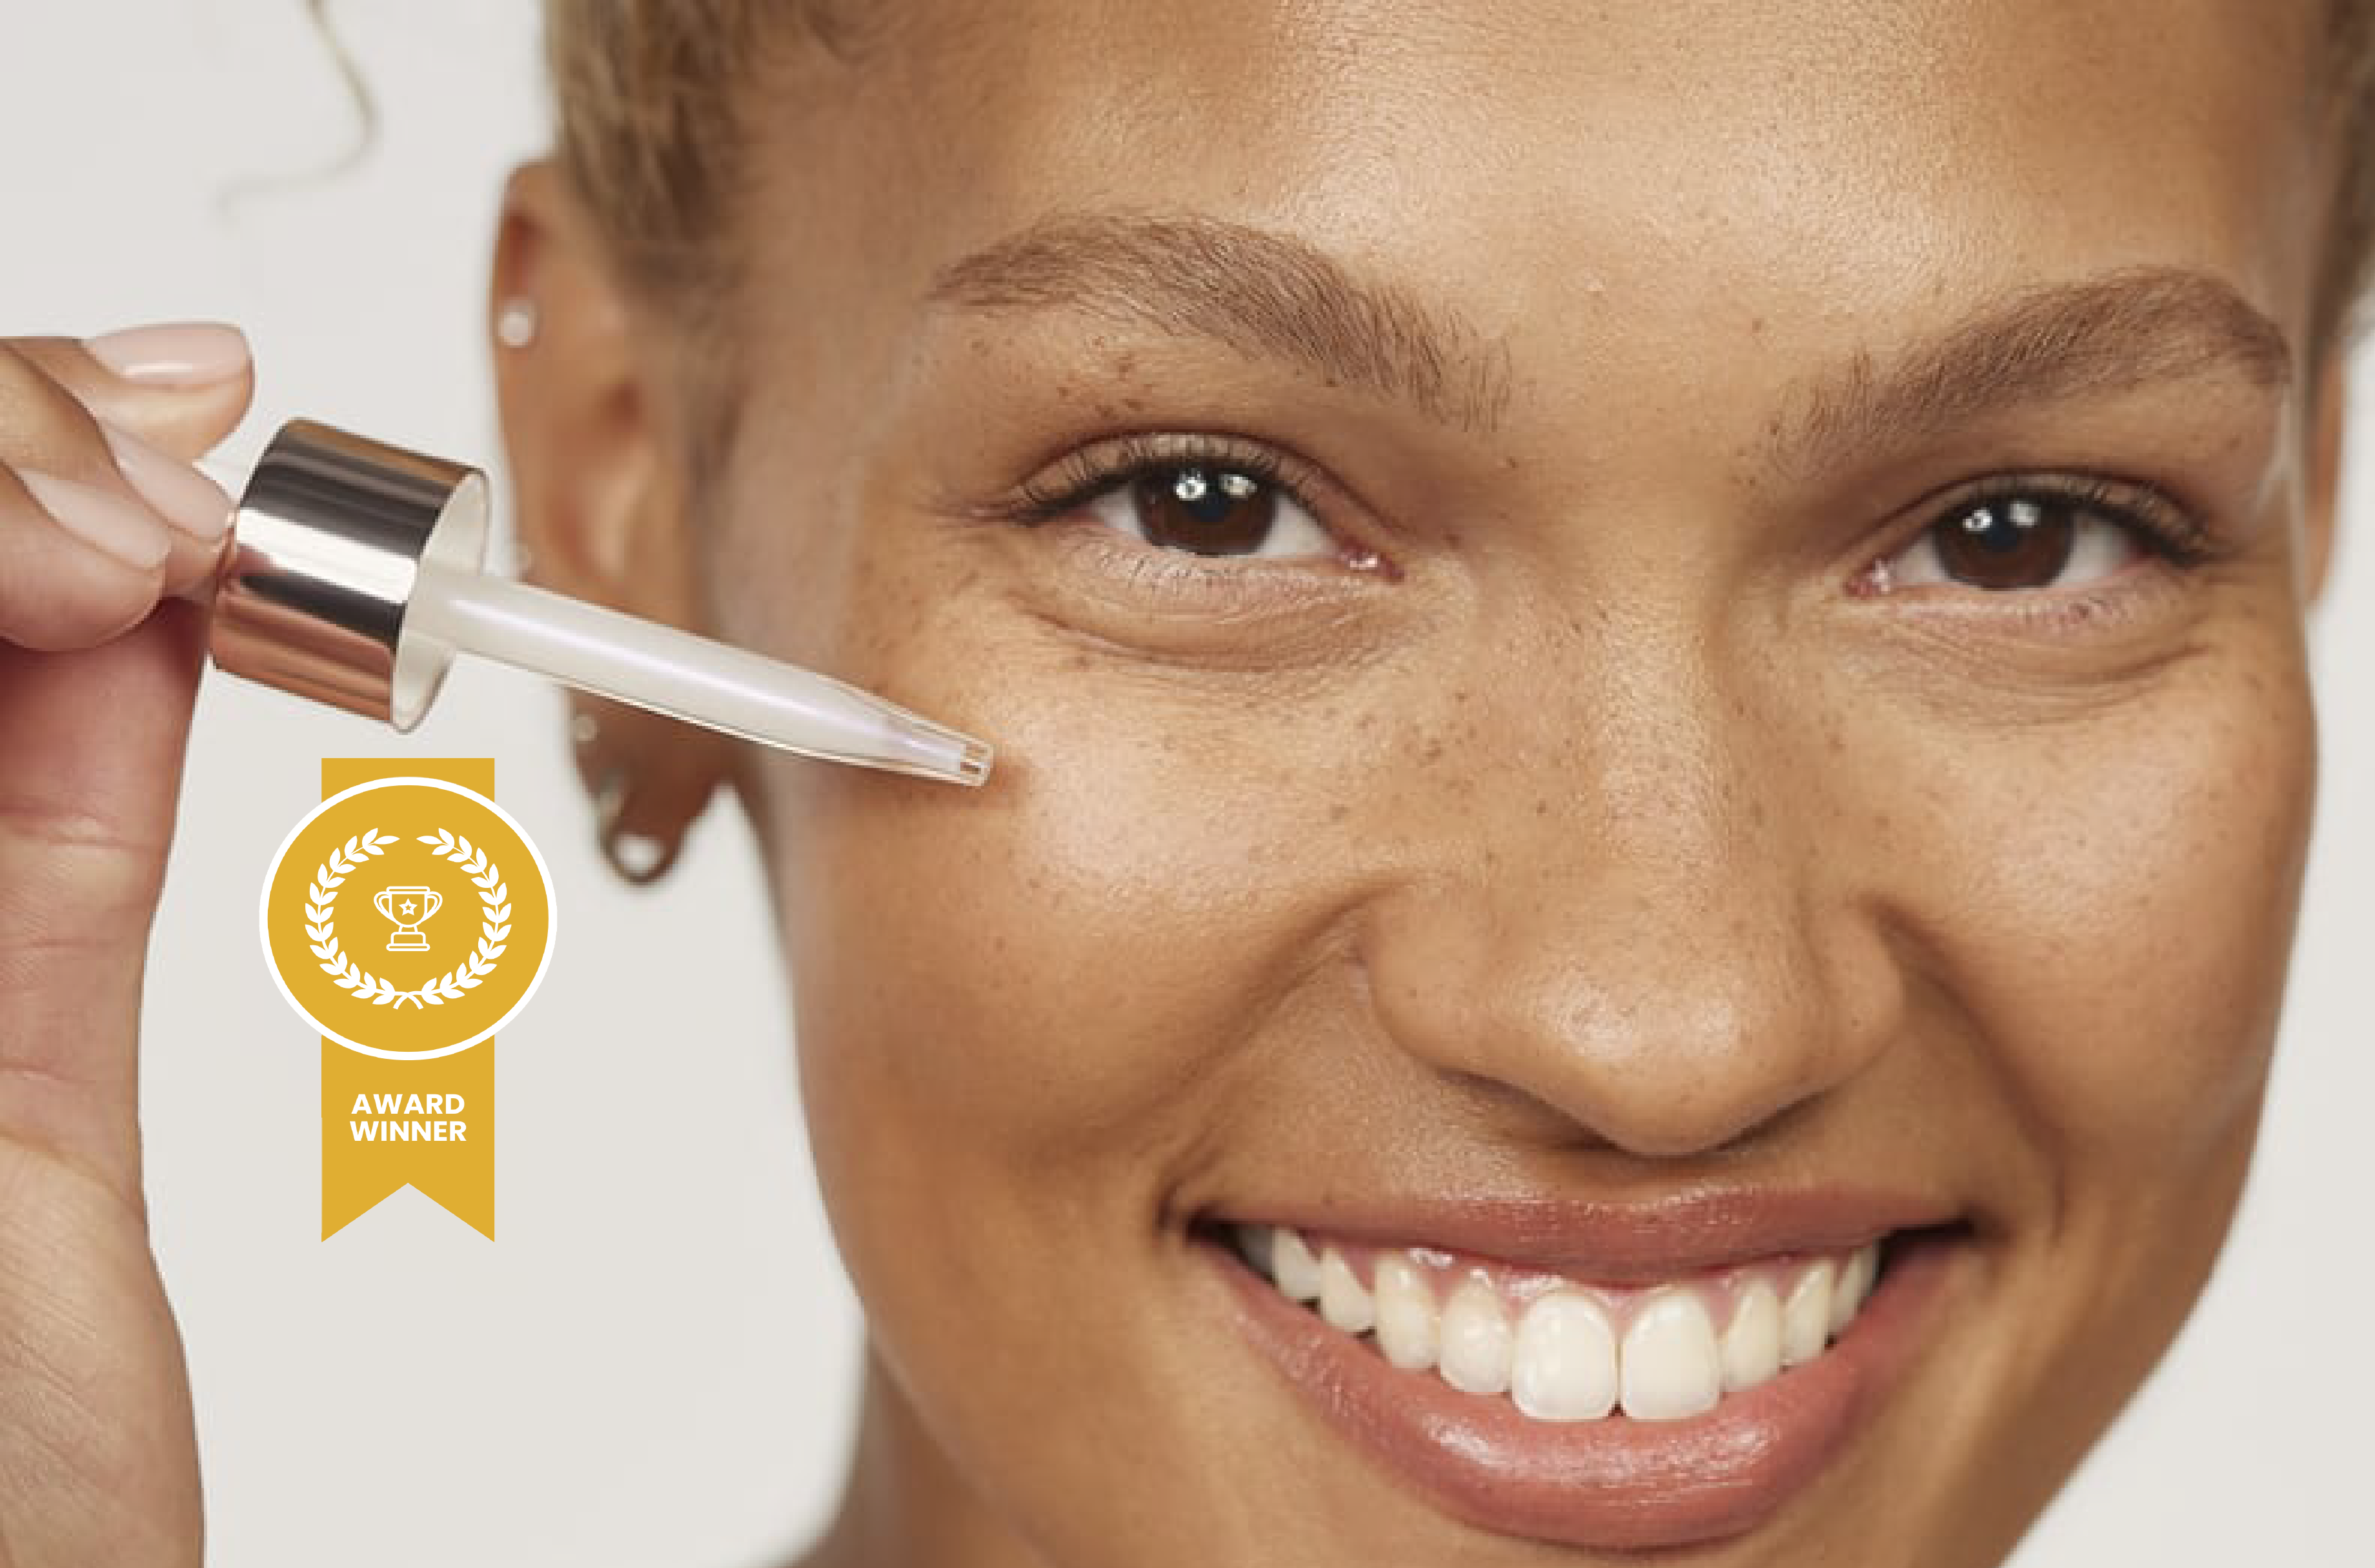 Woman applying Olay Super Serum to face with an award winner badge overlayed